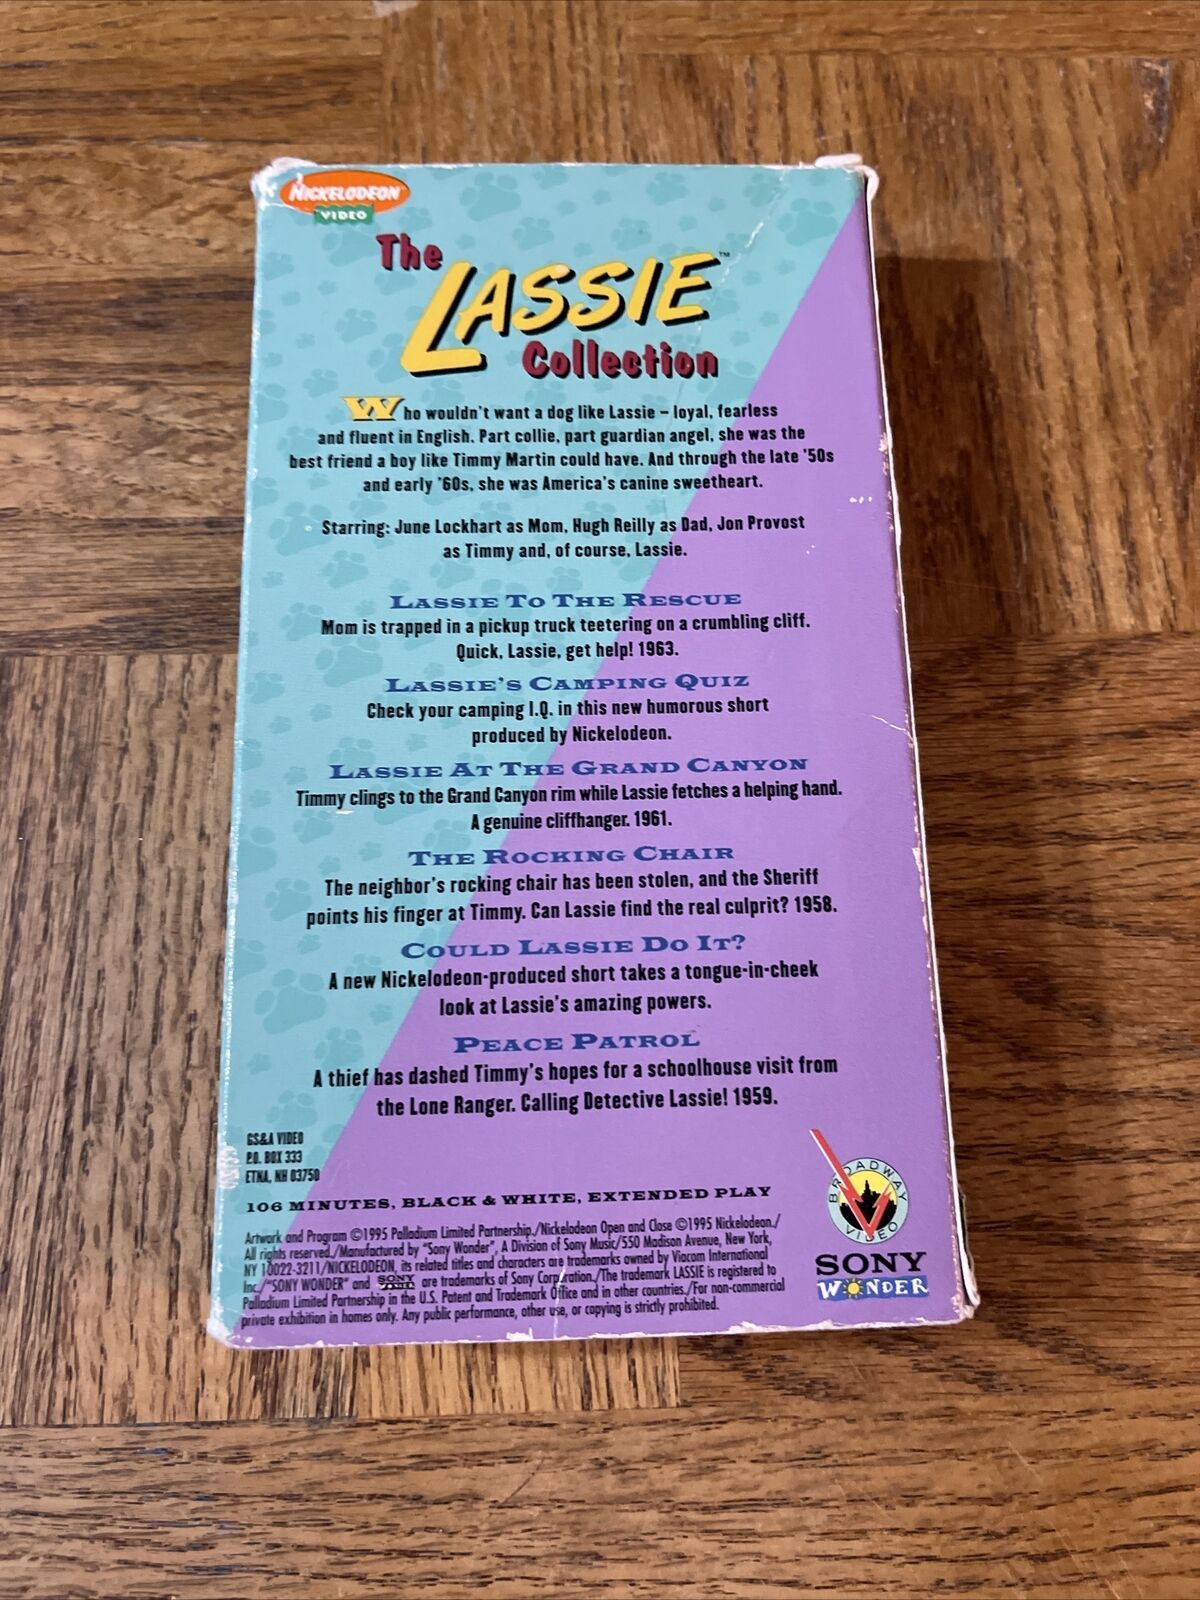 The Lassie Collection Vhs Vhs Tapes 